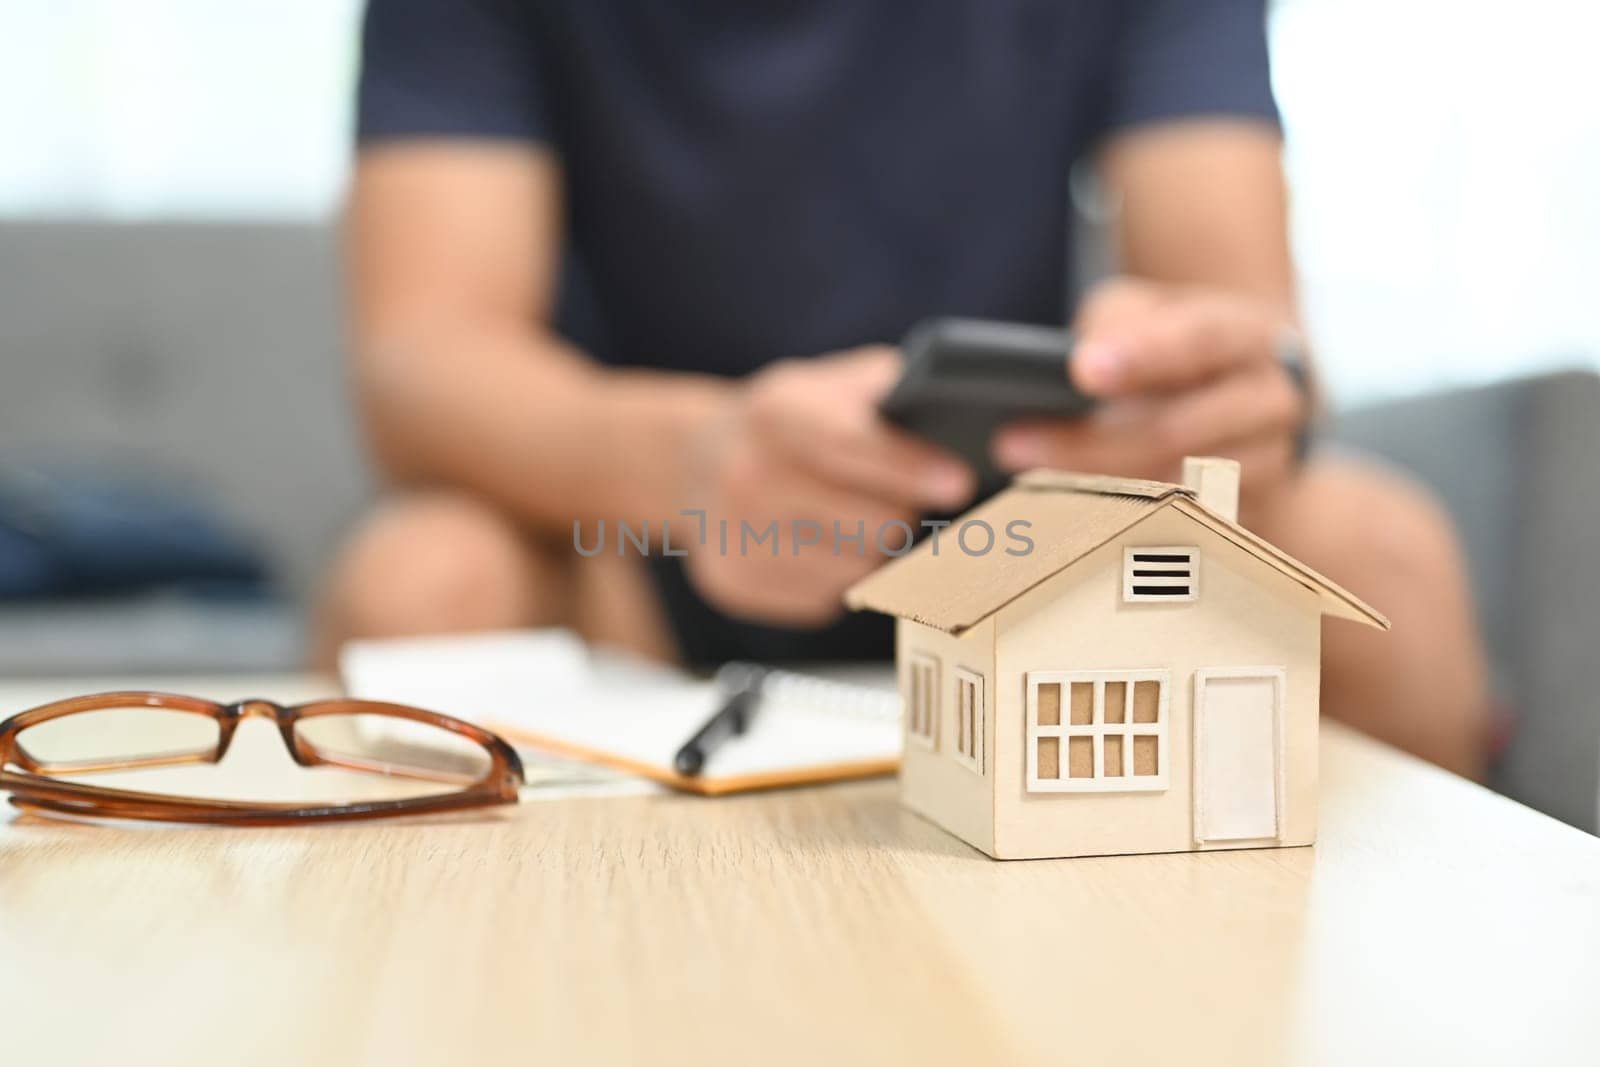 A house model, calculator and document on table with man sitting in background. Household finance concept by prathanchorruangsak